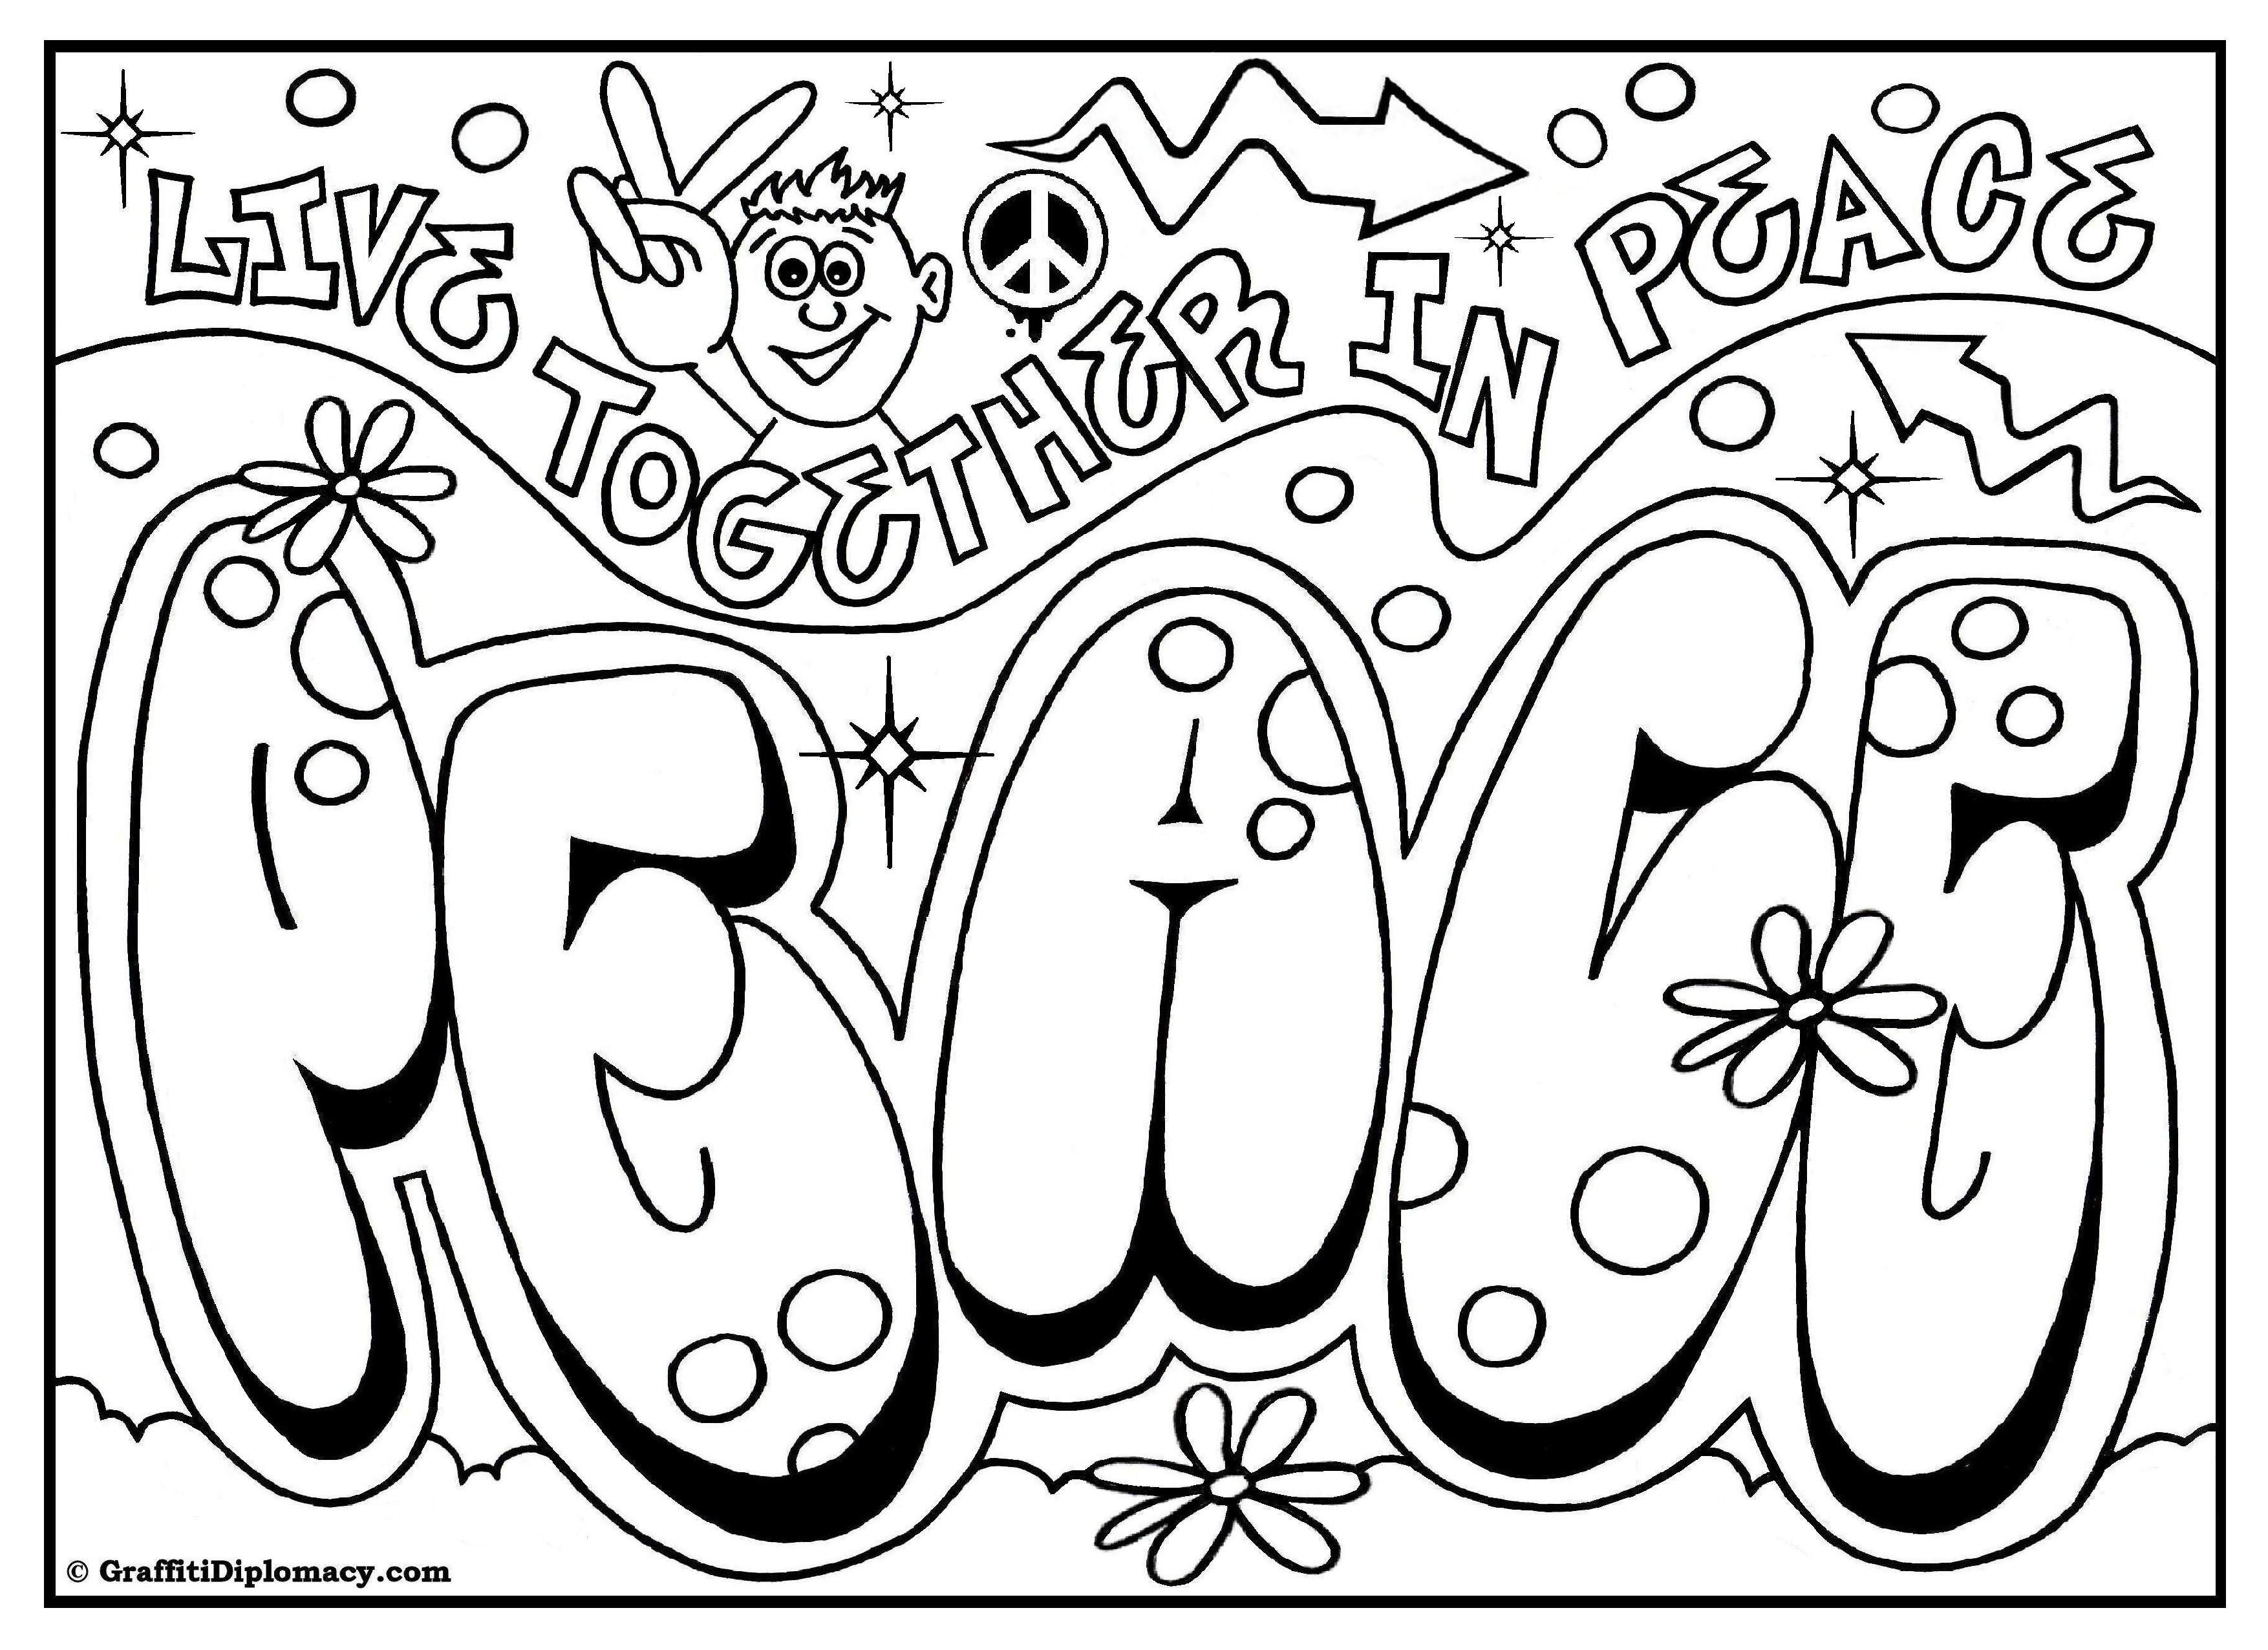 Turnip Coloring Page Turnip Coloring Page 10 Com Best Of Abc Pages Projectelysium